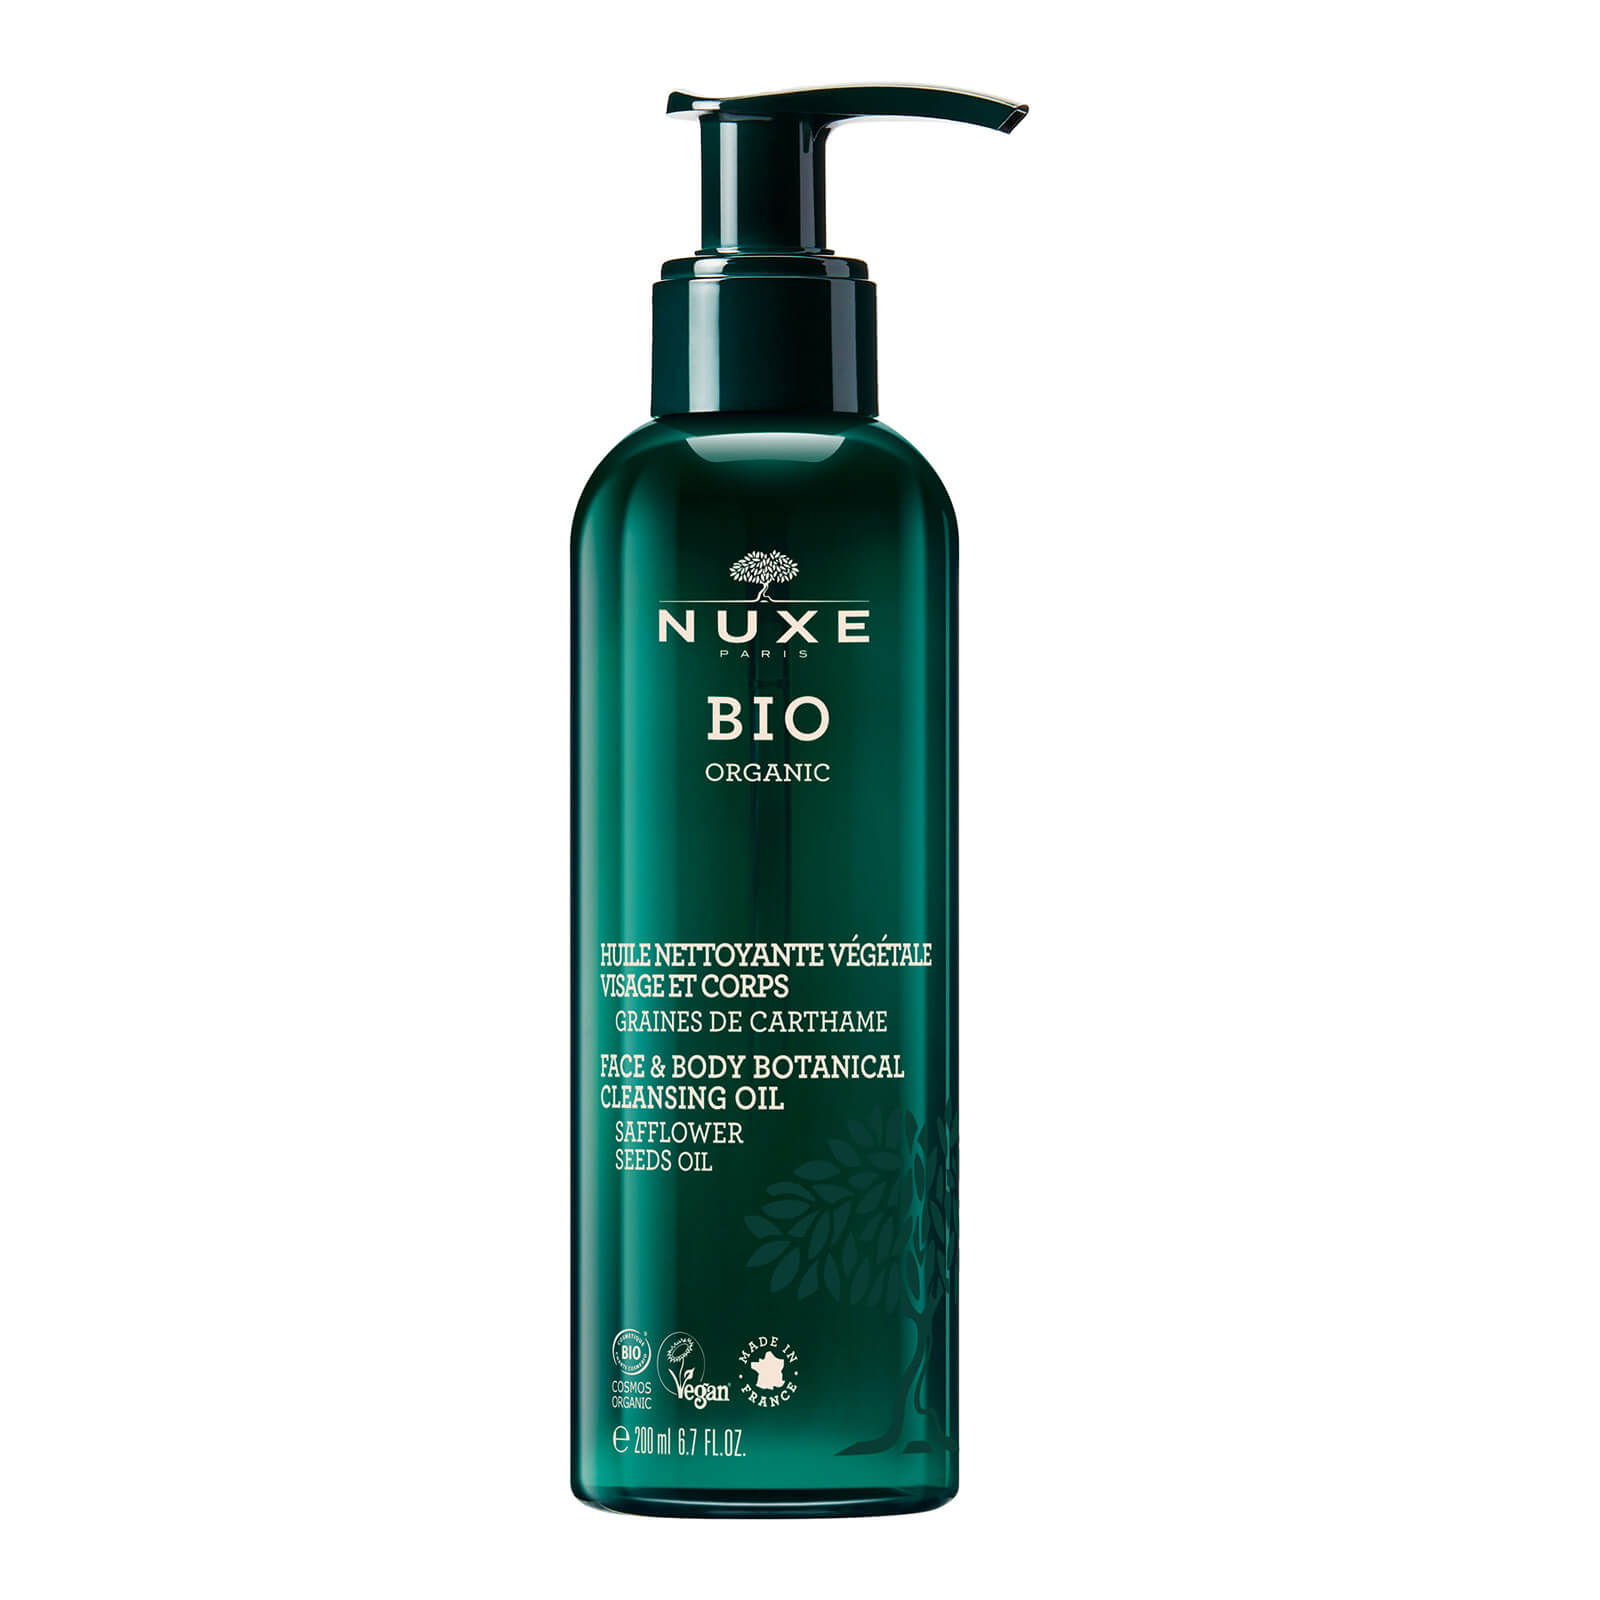 Photos - Facial / Body Cleansing Product Nuxe Vegetable Cleansing Oil,  Bio 200ml 